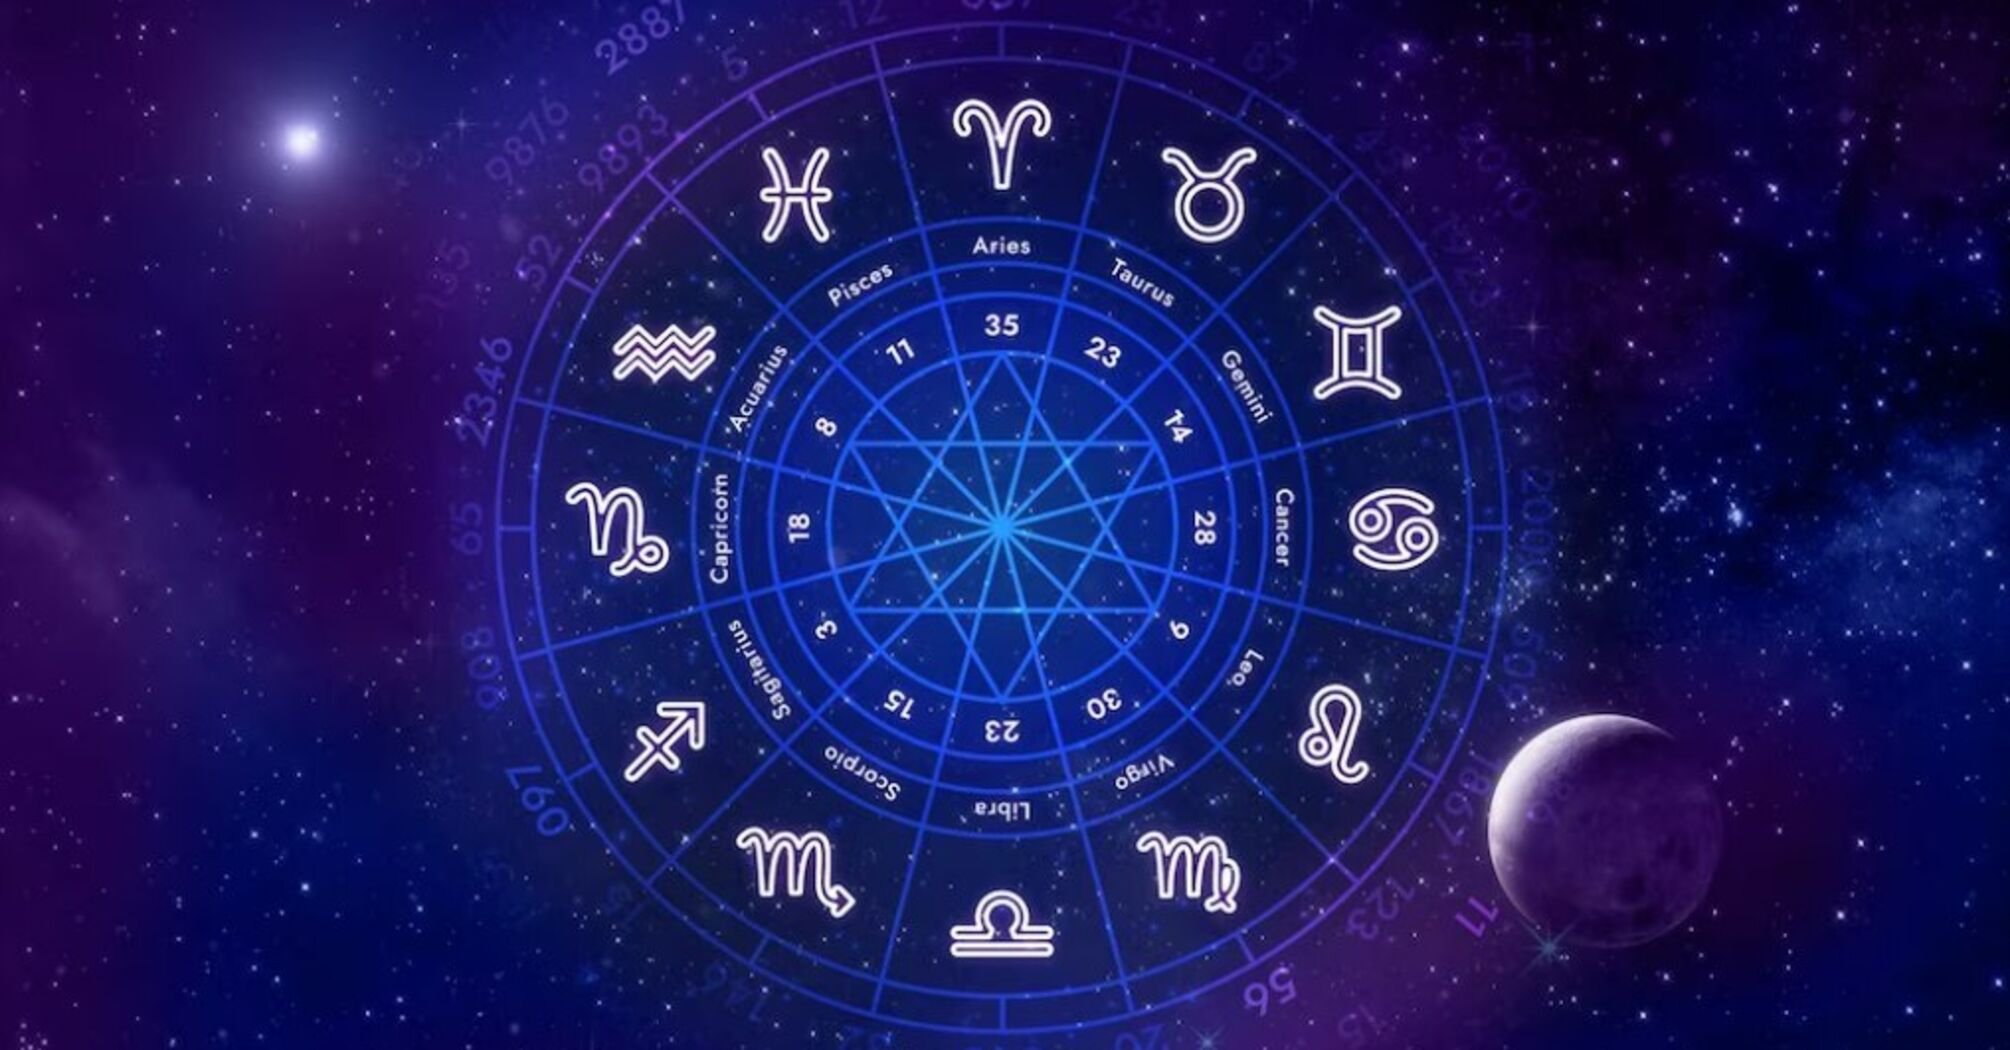 These zodiac signs can expect good career prospects this week